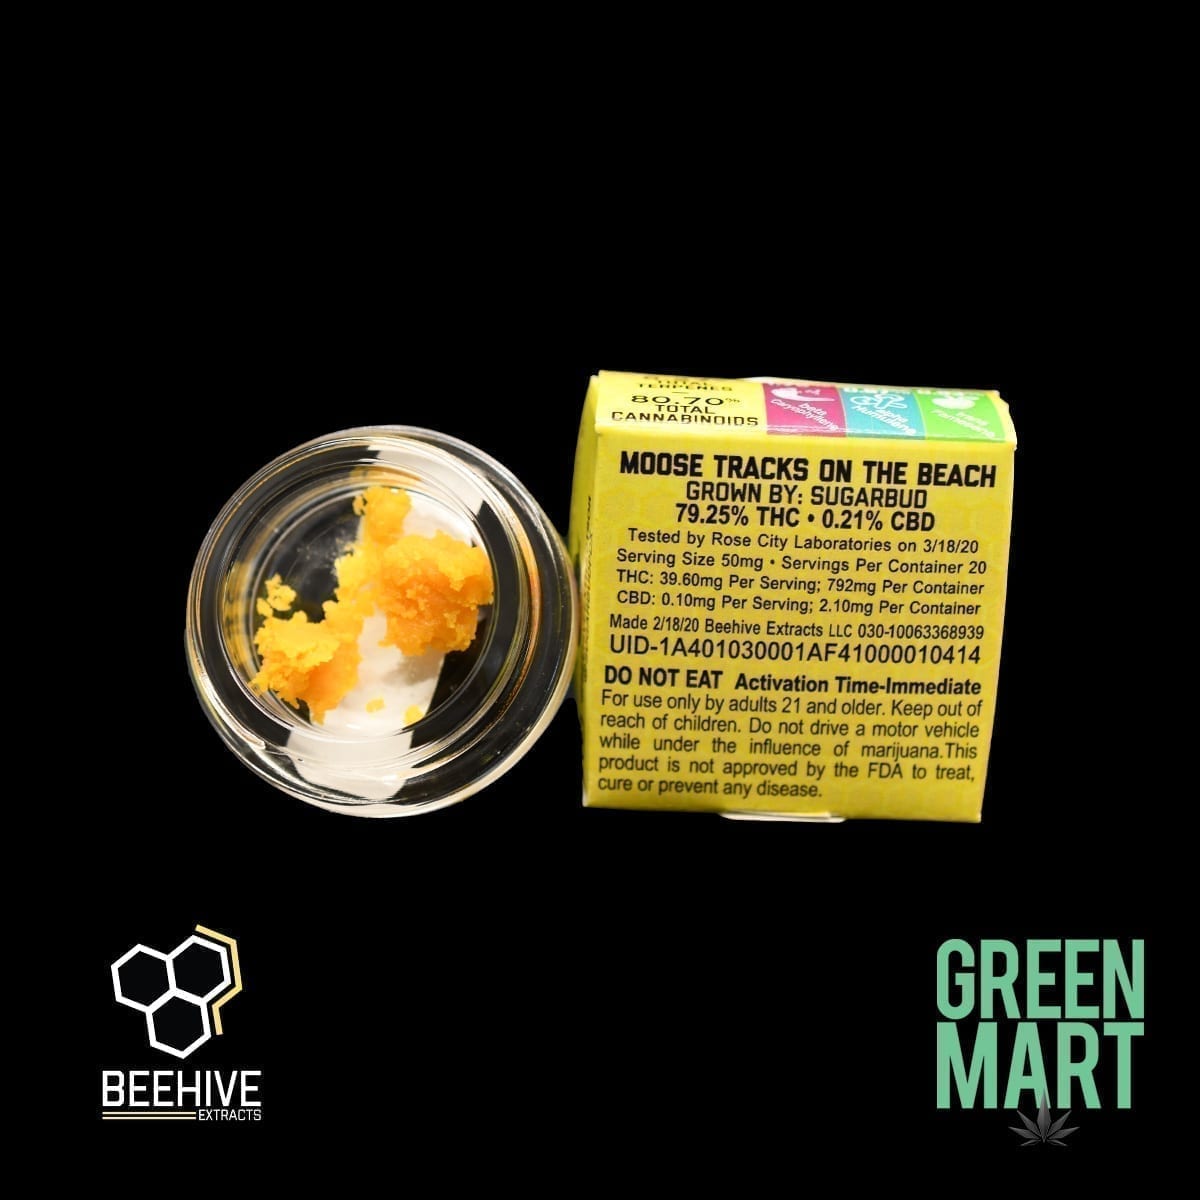 Beehive Extracts - Moose Tracks on the Beach